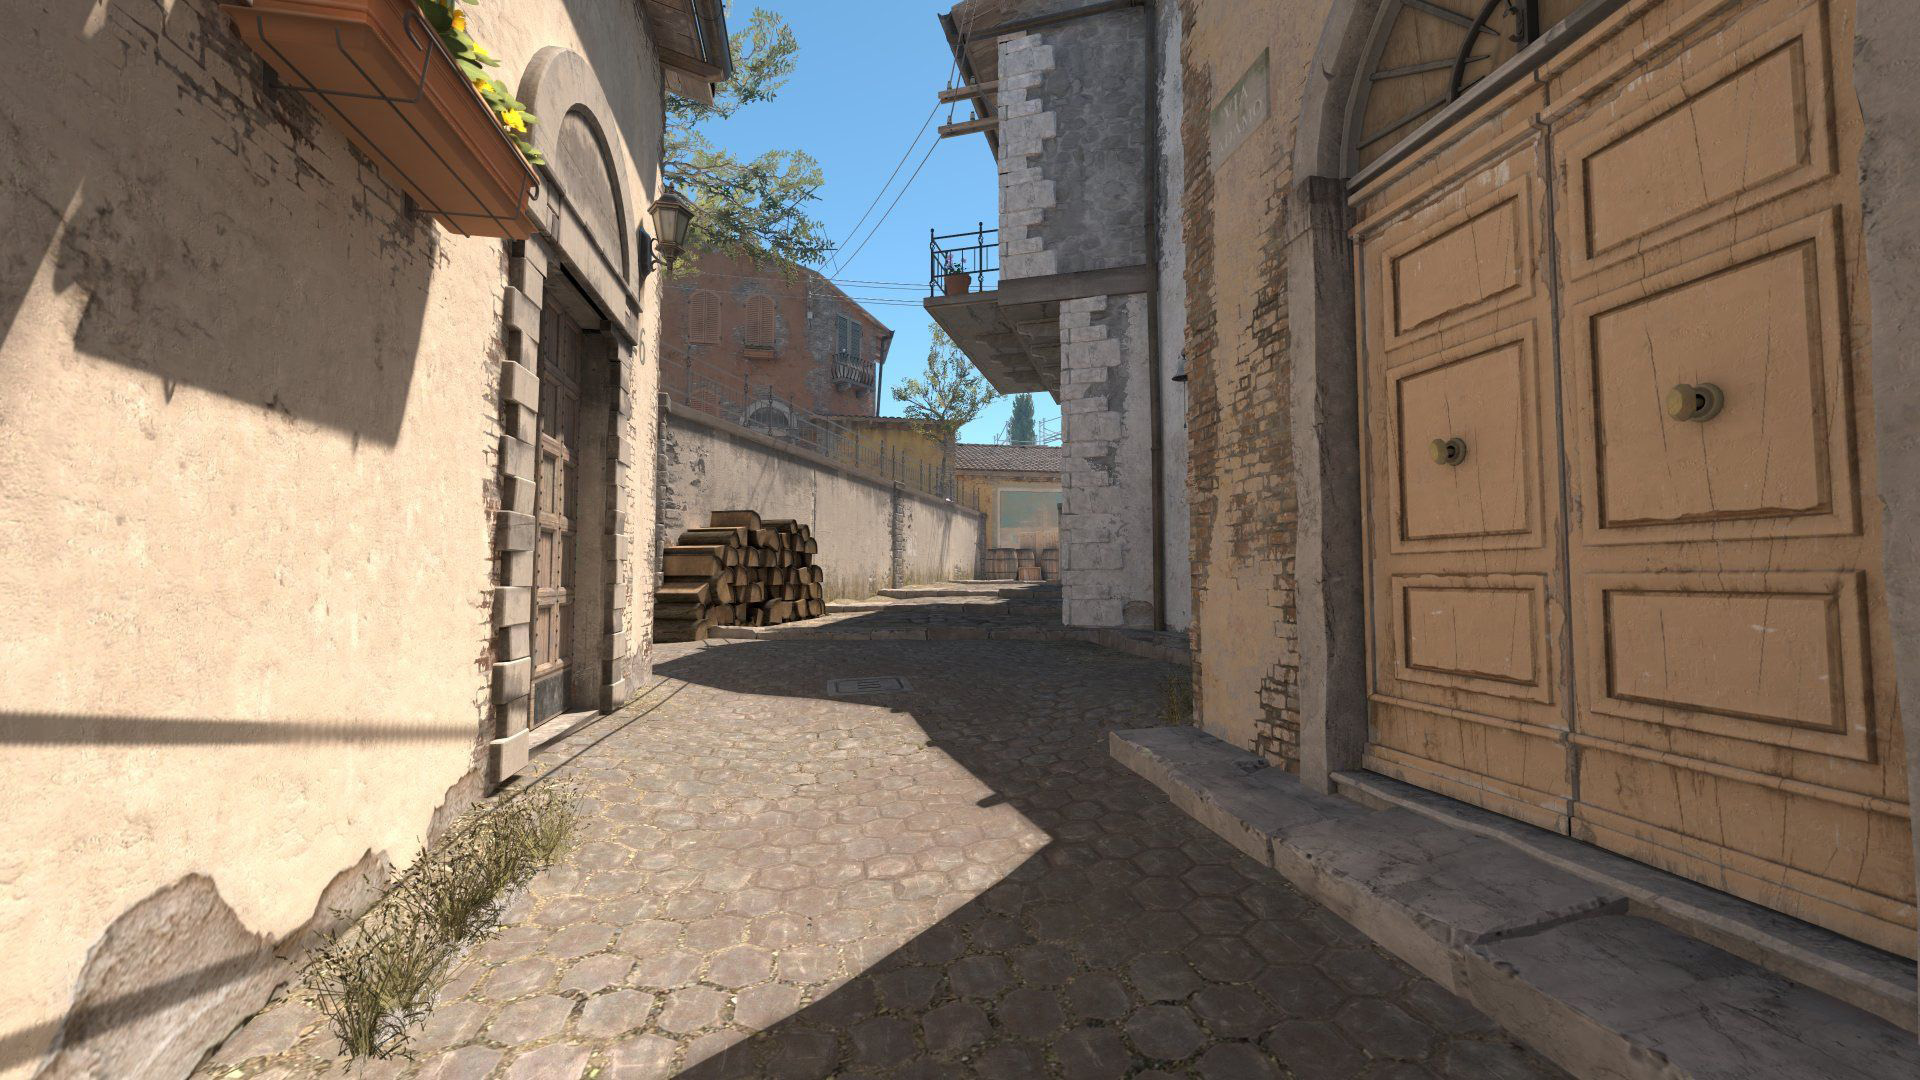 cs_tomte2 (Map) for Counter-Strike 